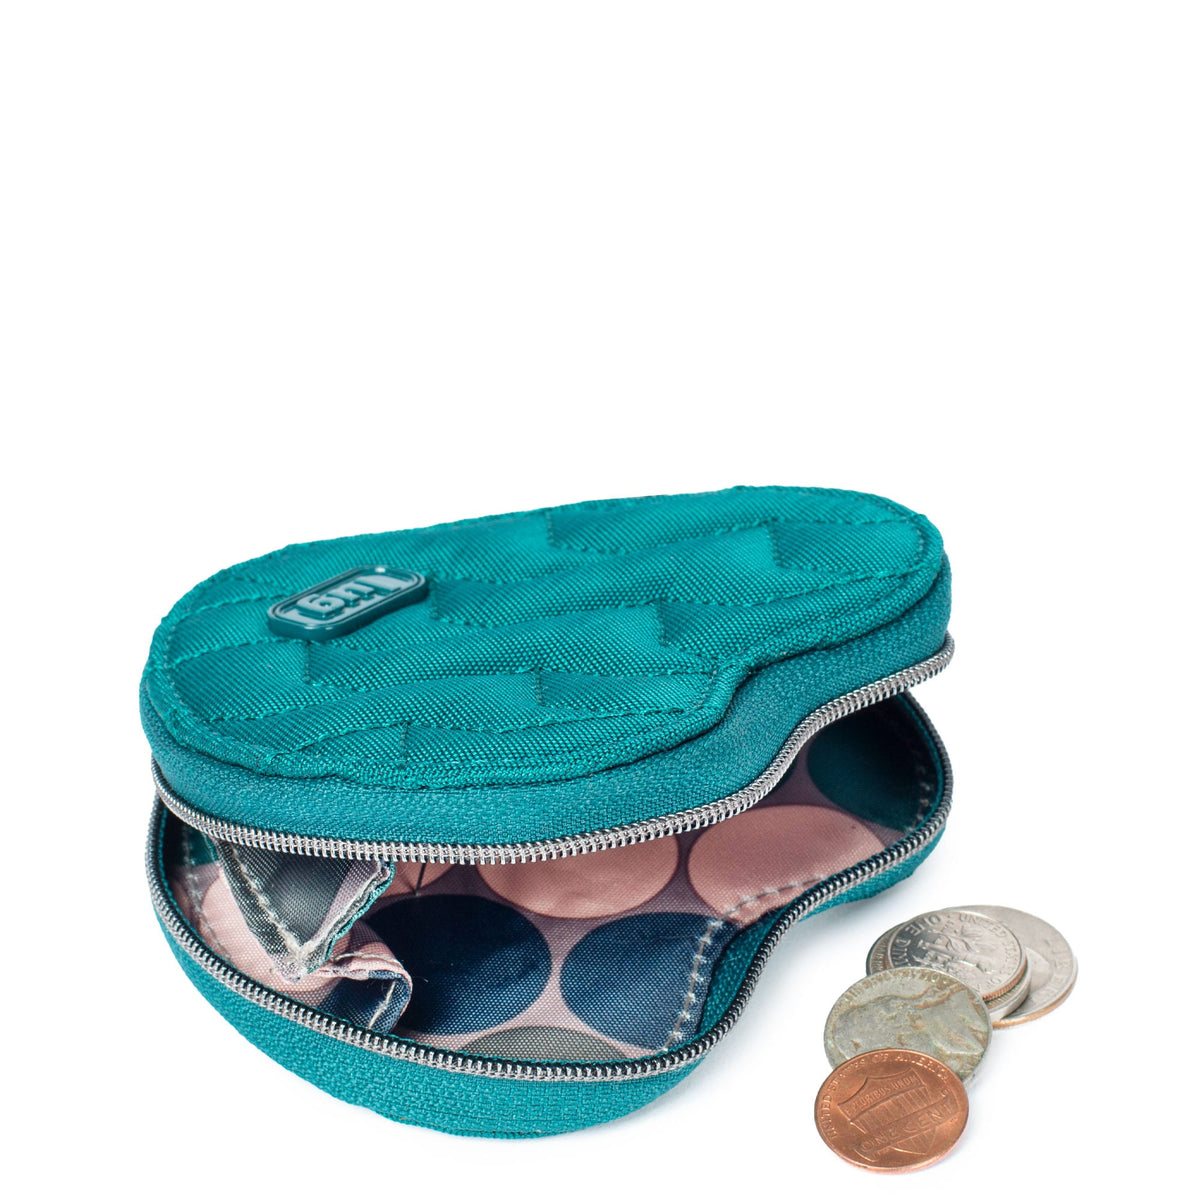 LUG - Coin Pouch - Floral Multi - Planktown Hardware & More